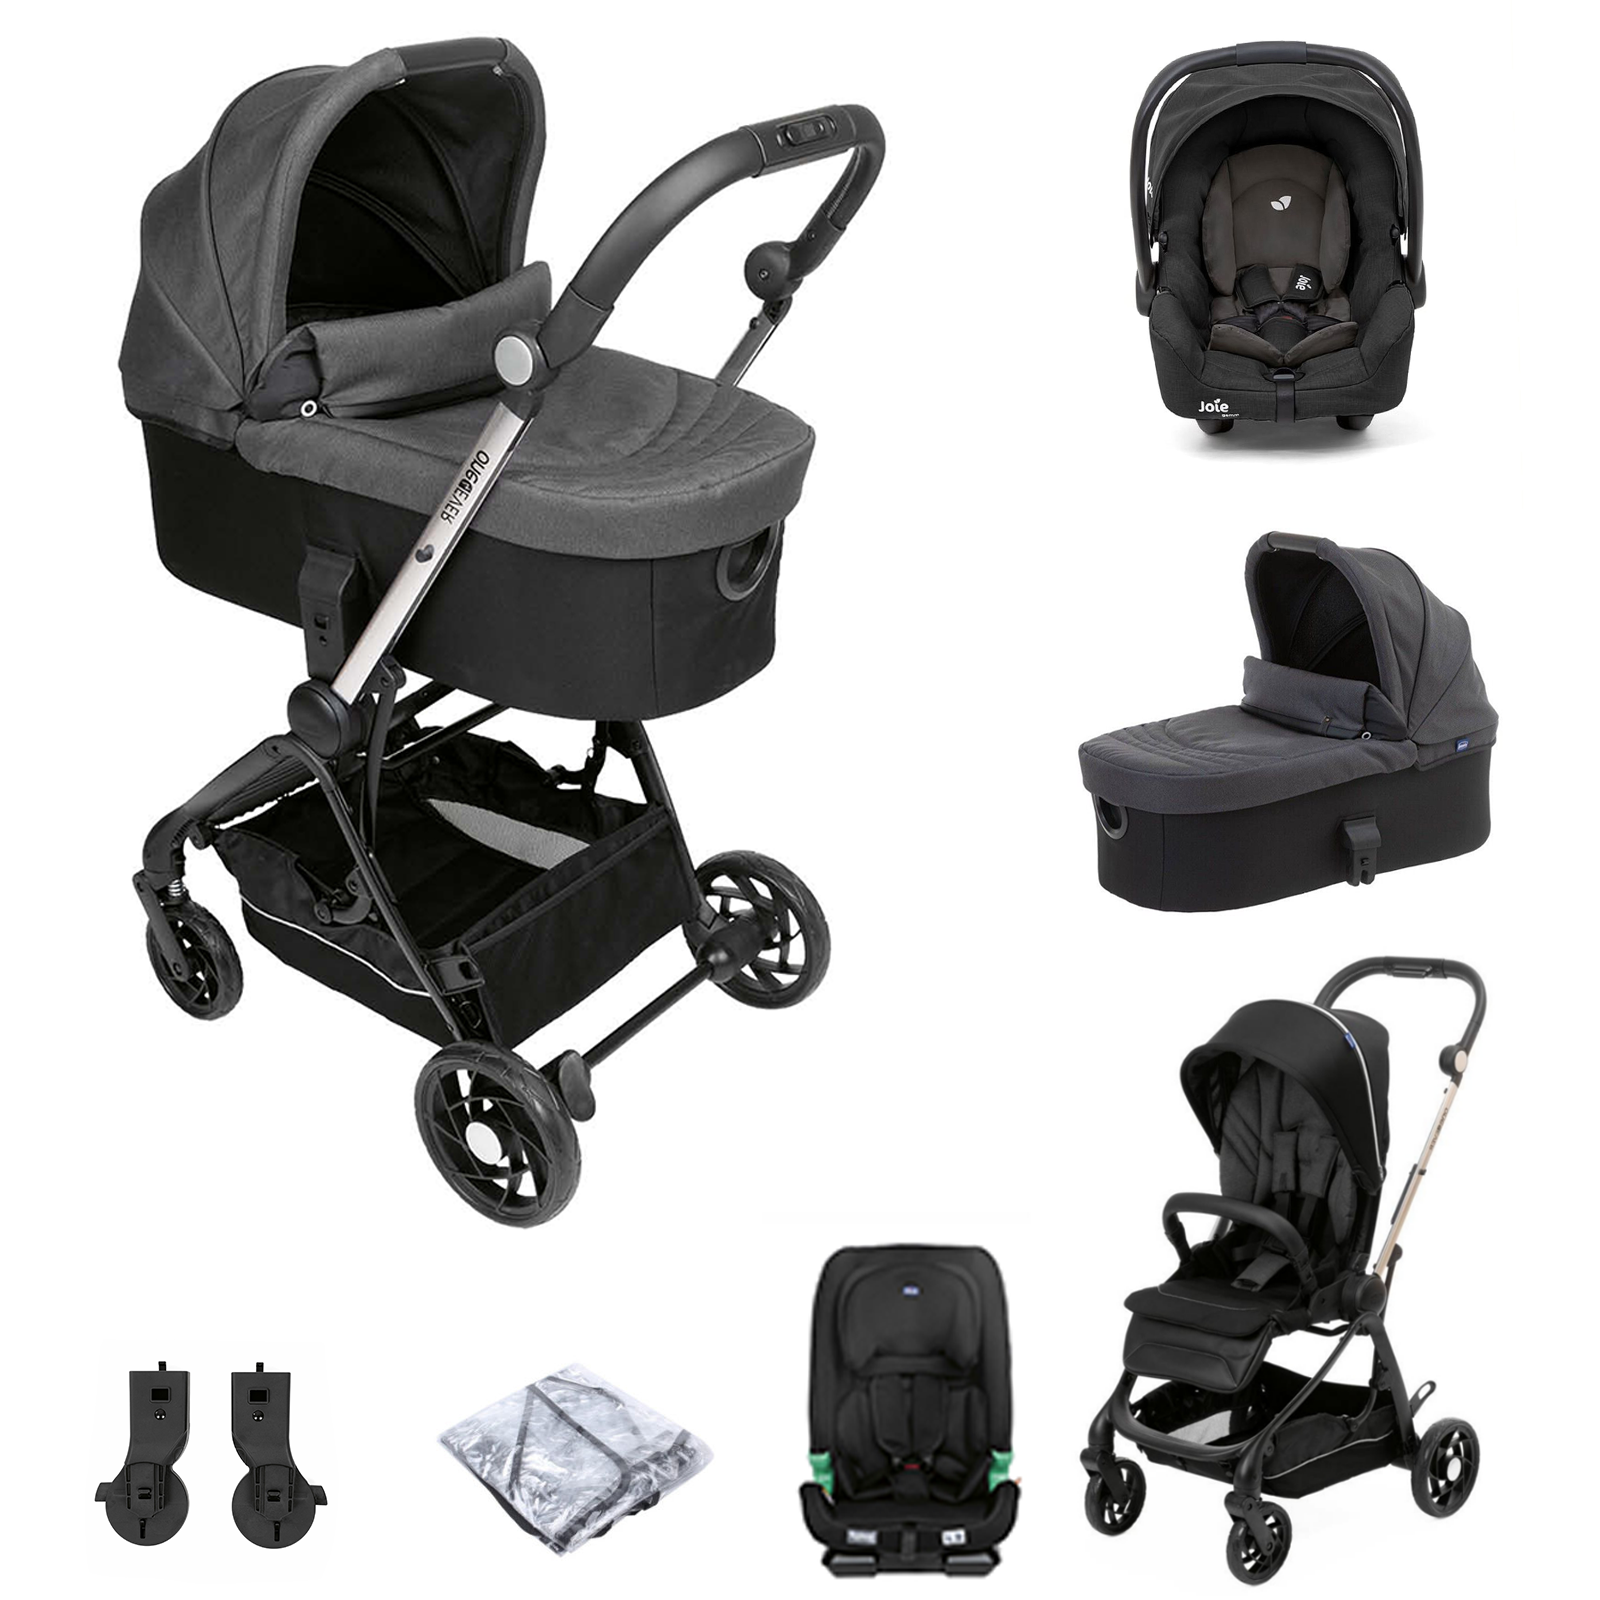 Chicco One4ever Gemm Travel System, Carry Cot & I-Size Car Seat - Pirate Black